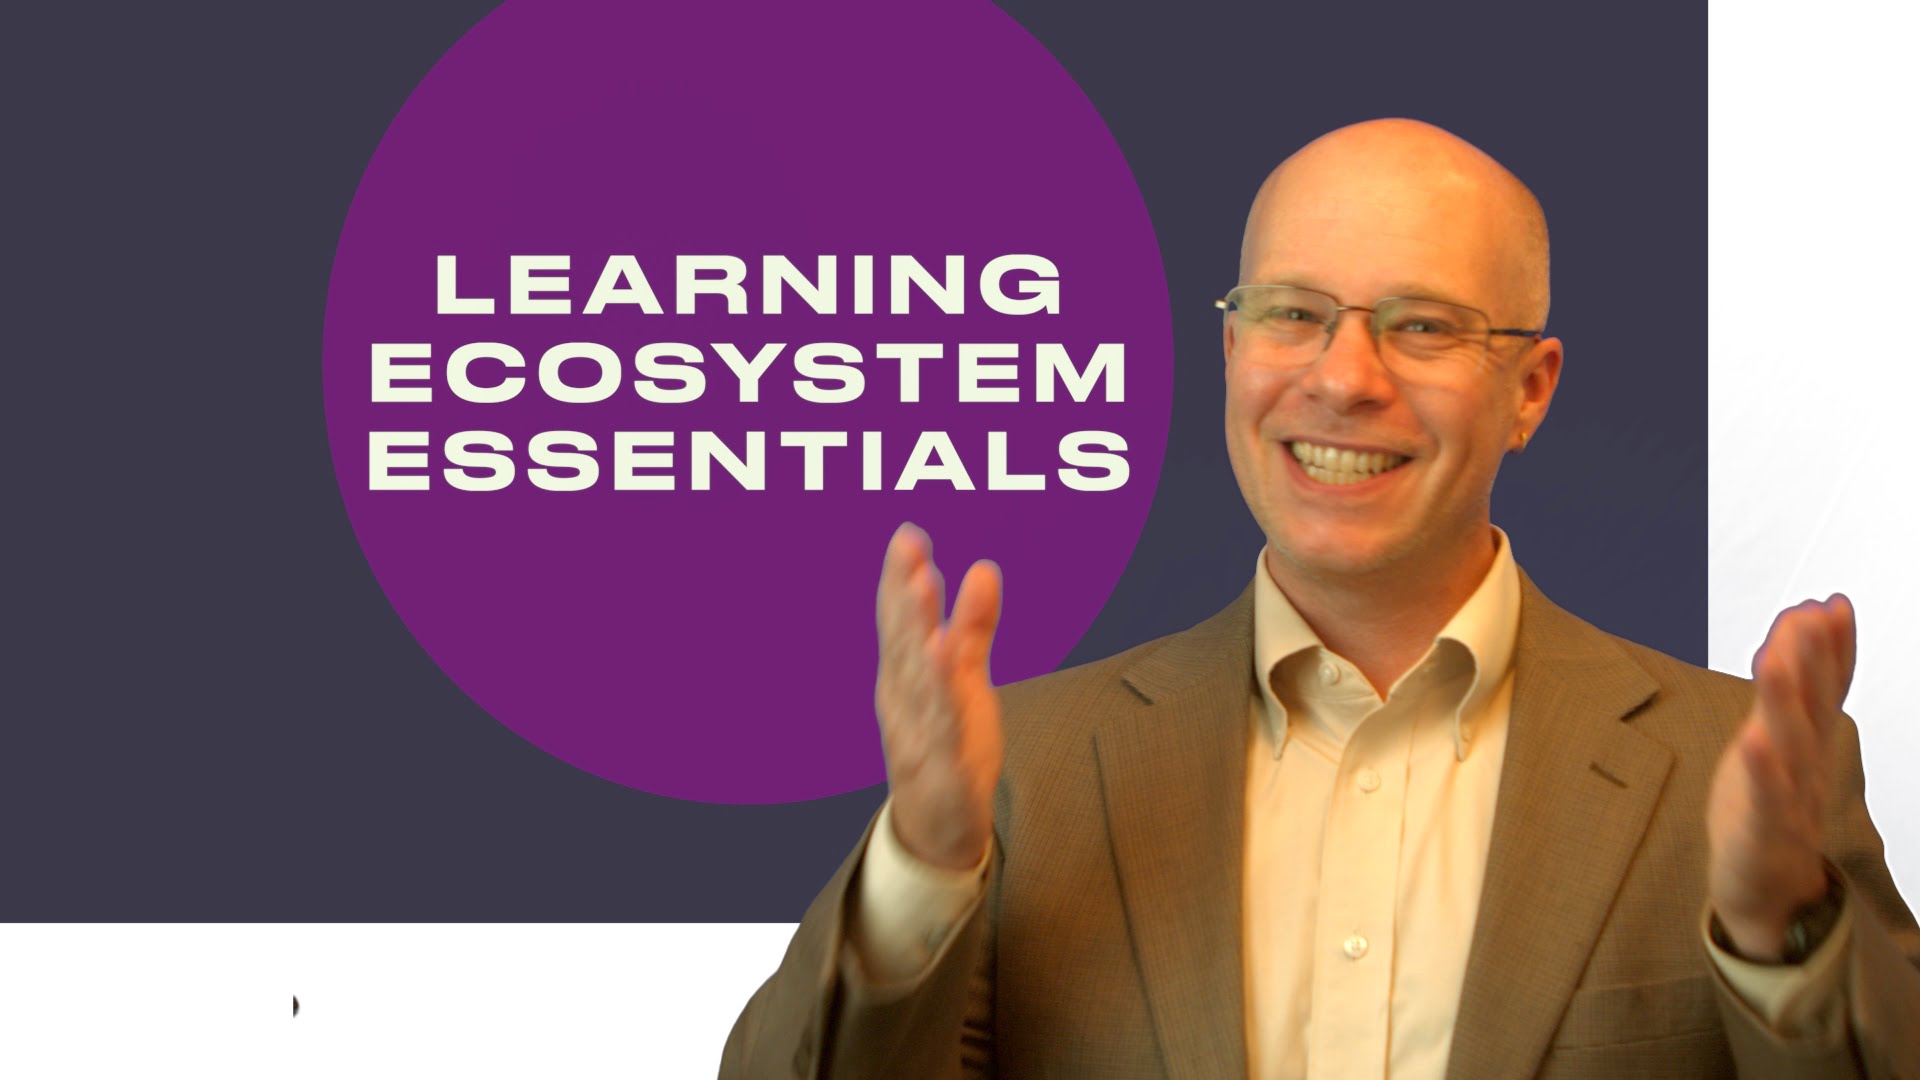 Sam Rogers presenting the "Learning Ecosystem Essentials" 1hr video course